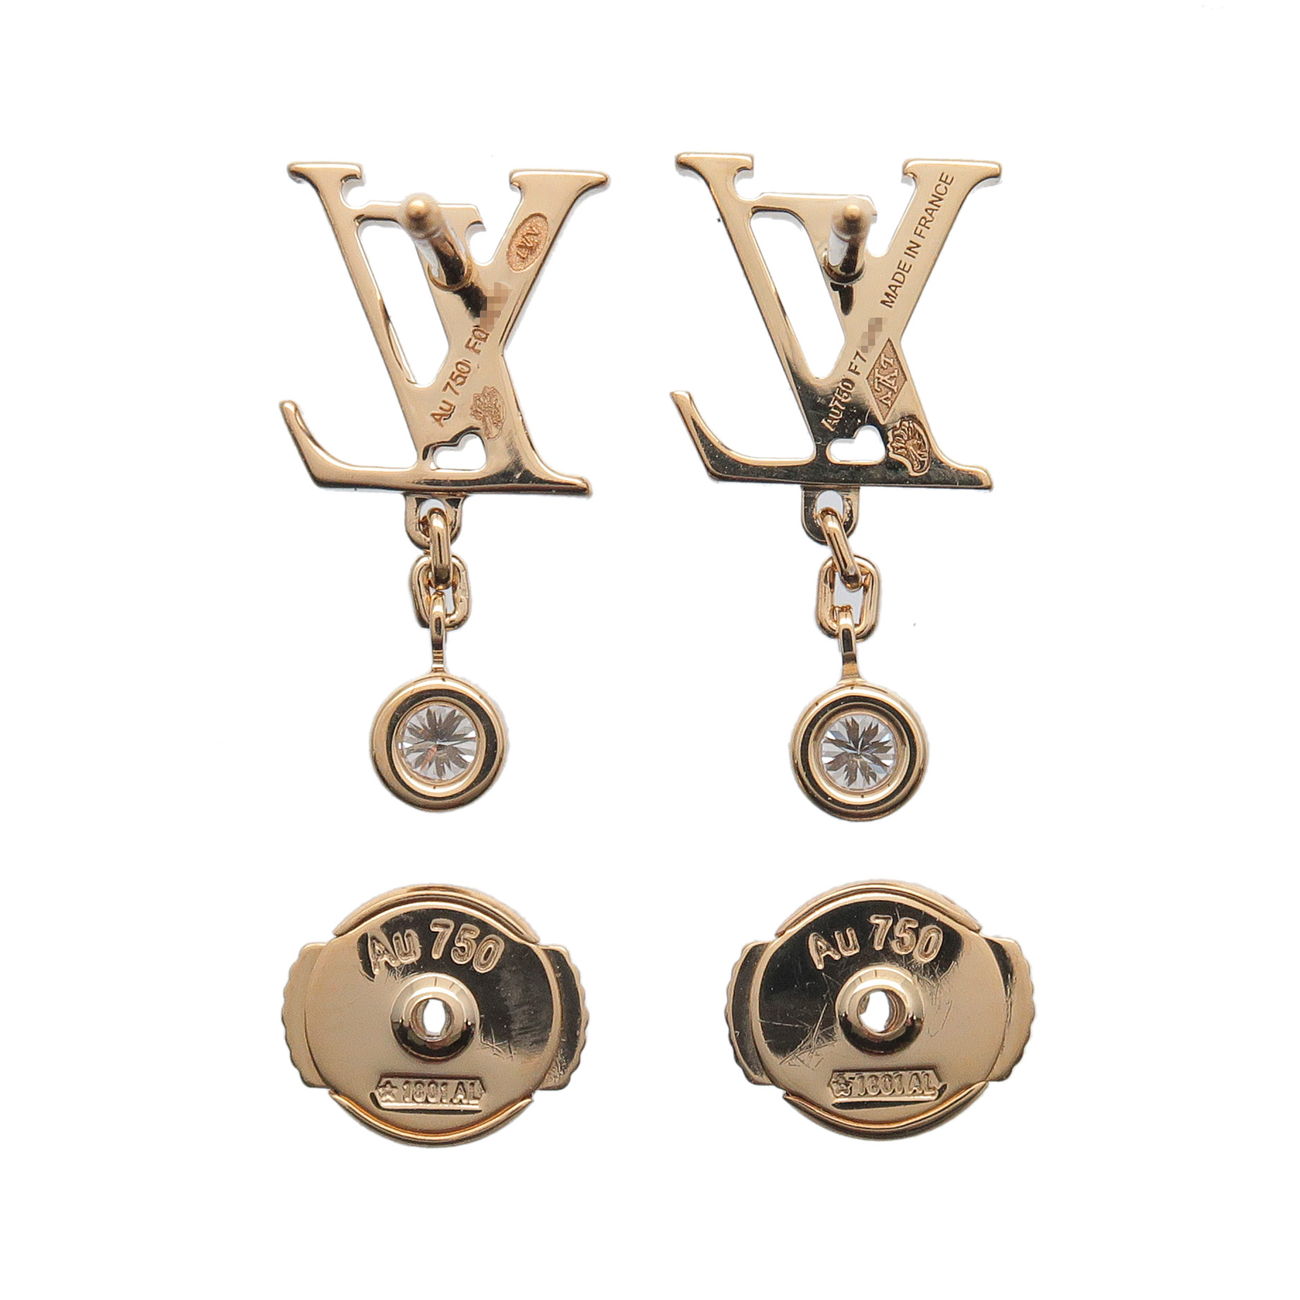 Louis Vuitton LV Edge MM Earrings Gold in Gold Metal with Gold